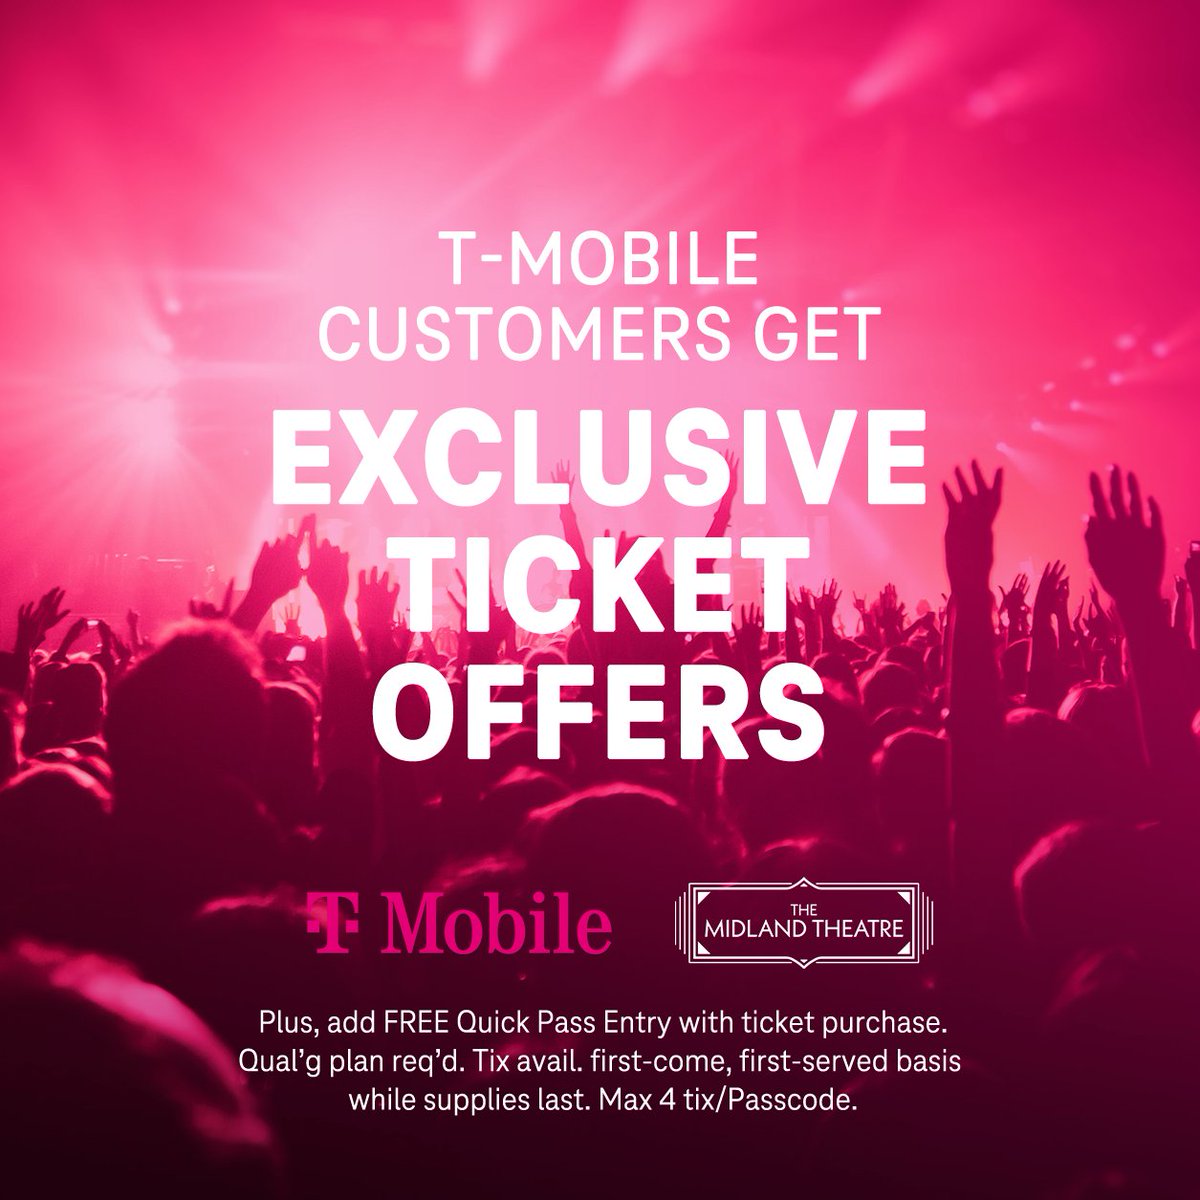 Get exclusive ticket offers when you’re a @tmobile customer 🤘 Click link in bio for more info!